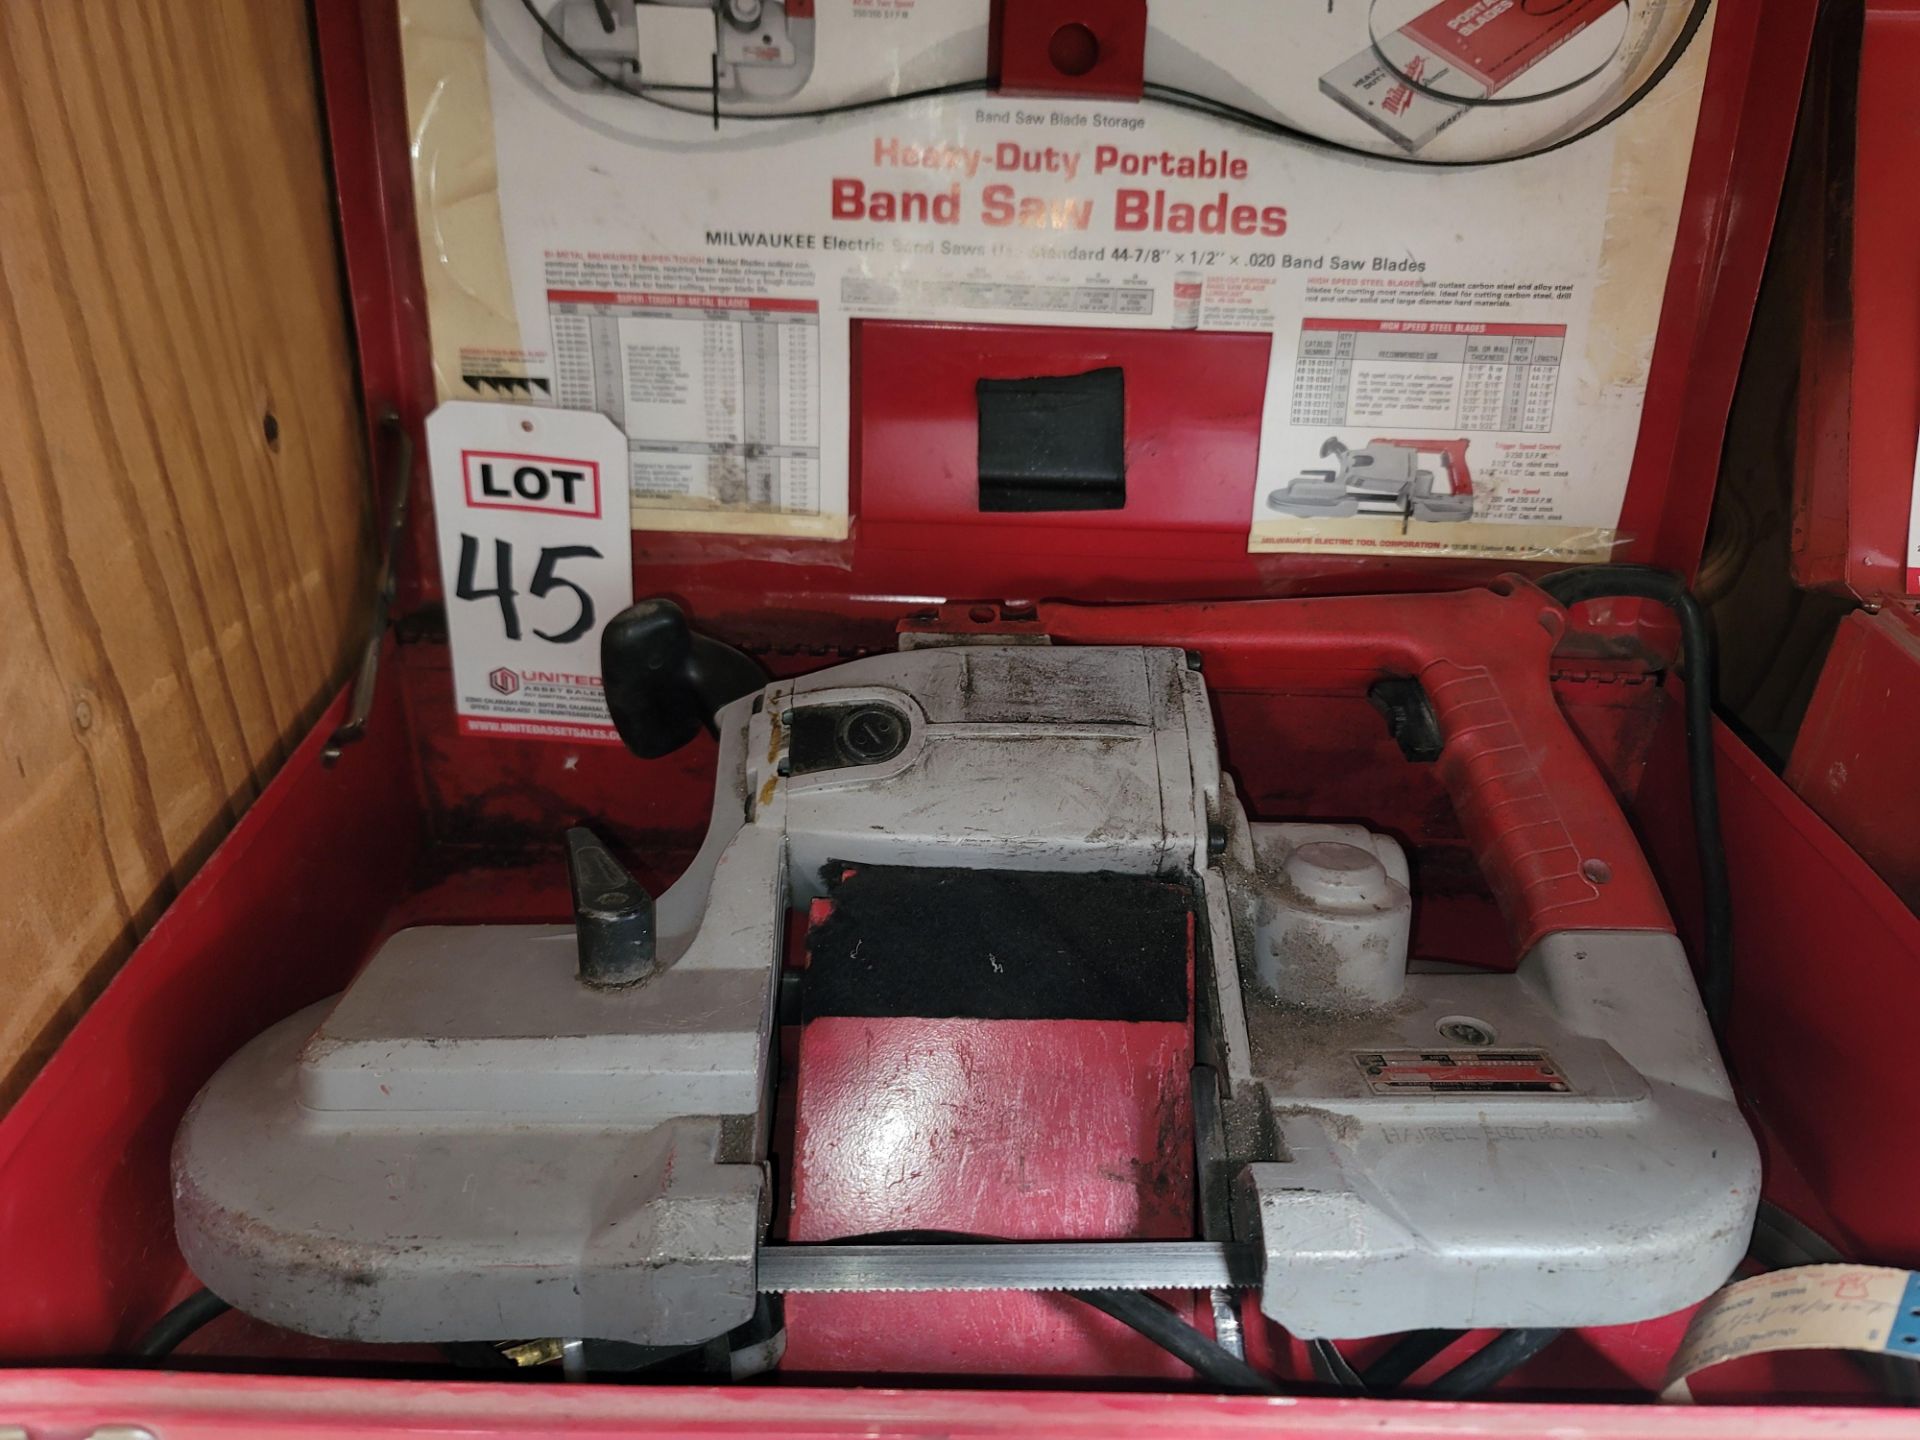 LOT - MILWAUKEE 6230 DEEP CUT 6 AMP PORTABLE BAND SAW, W/ CASE AND SPARE BLADES - Image 2 of 2